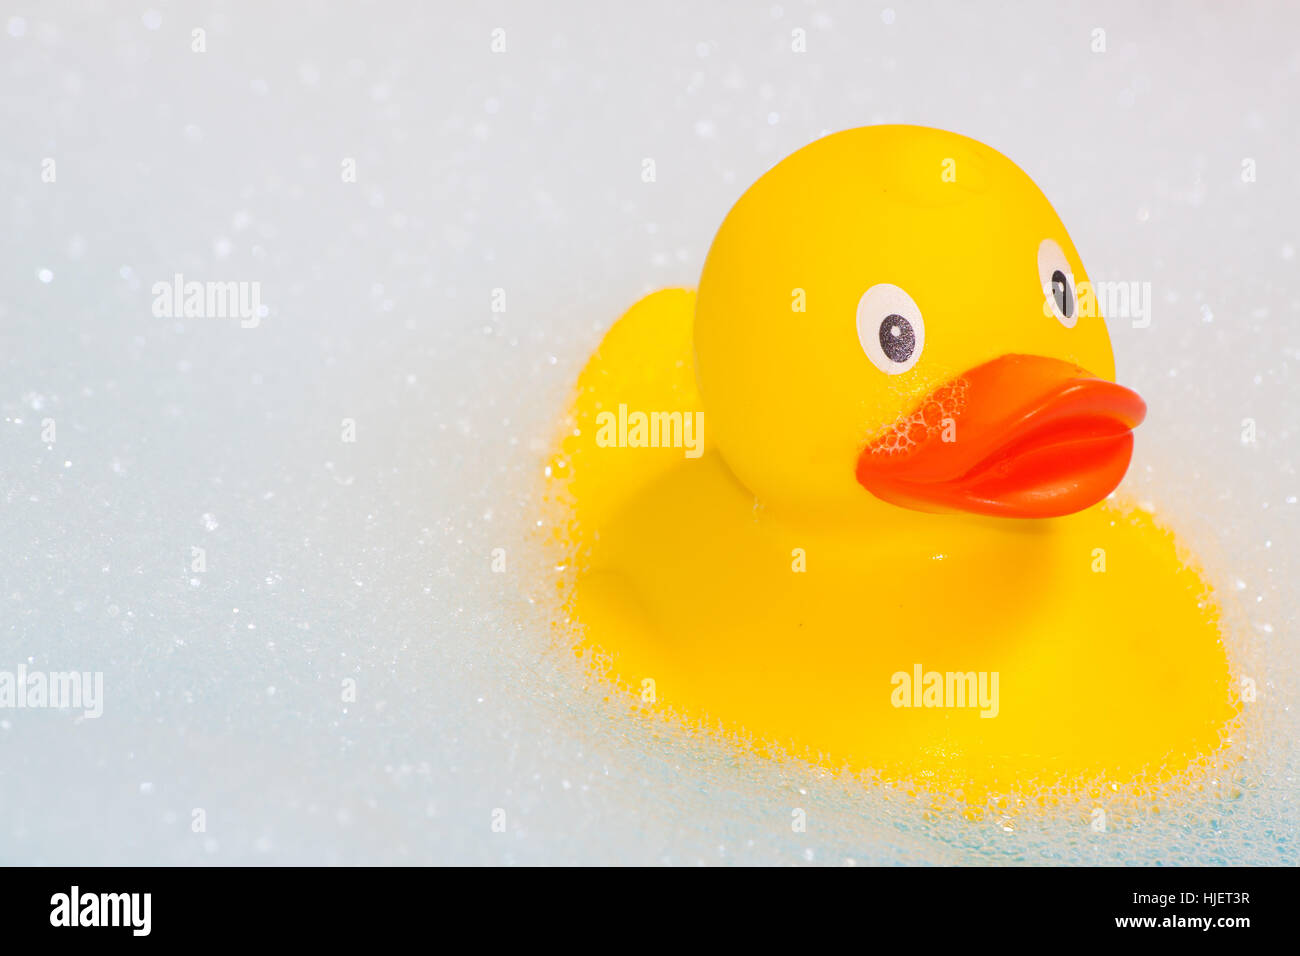 toy, plastic, synthetic material, bathwater, lather, bath foam, rubber duck, Stock Photo